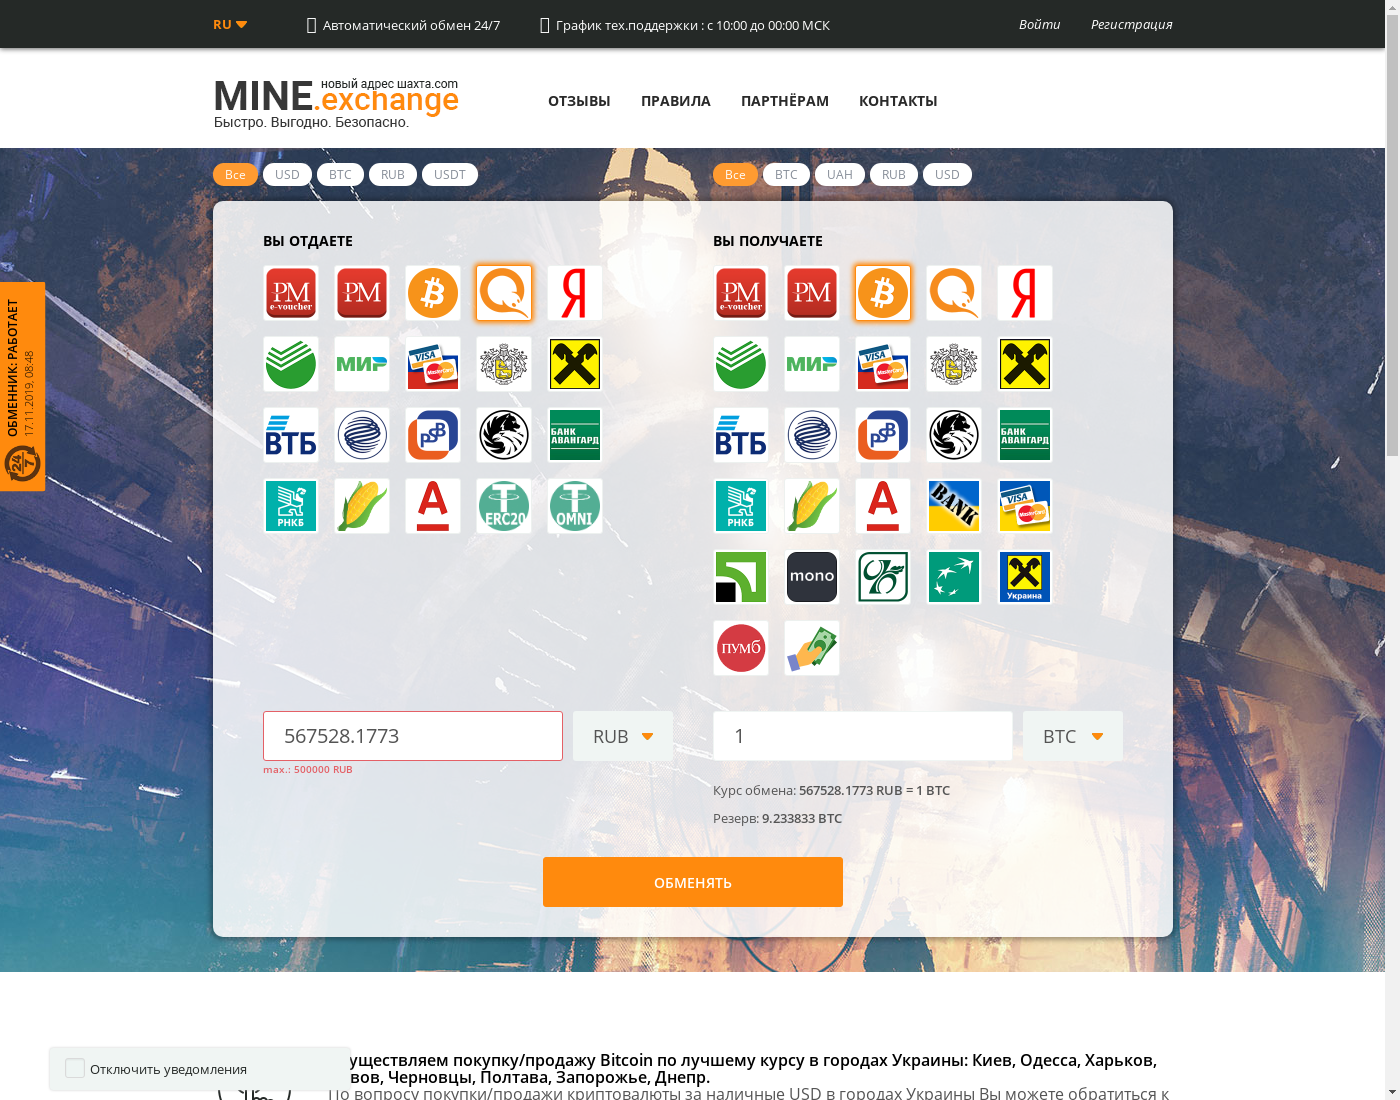 MINE user interface: the home page in English